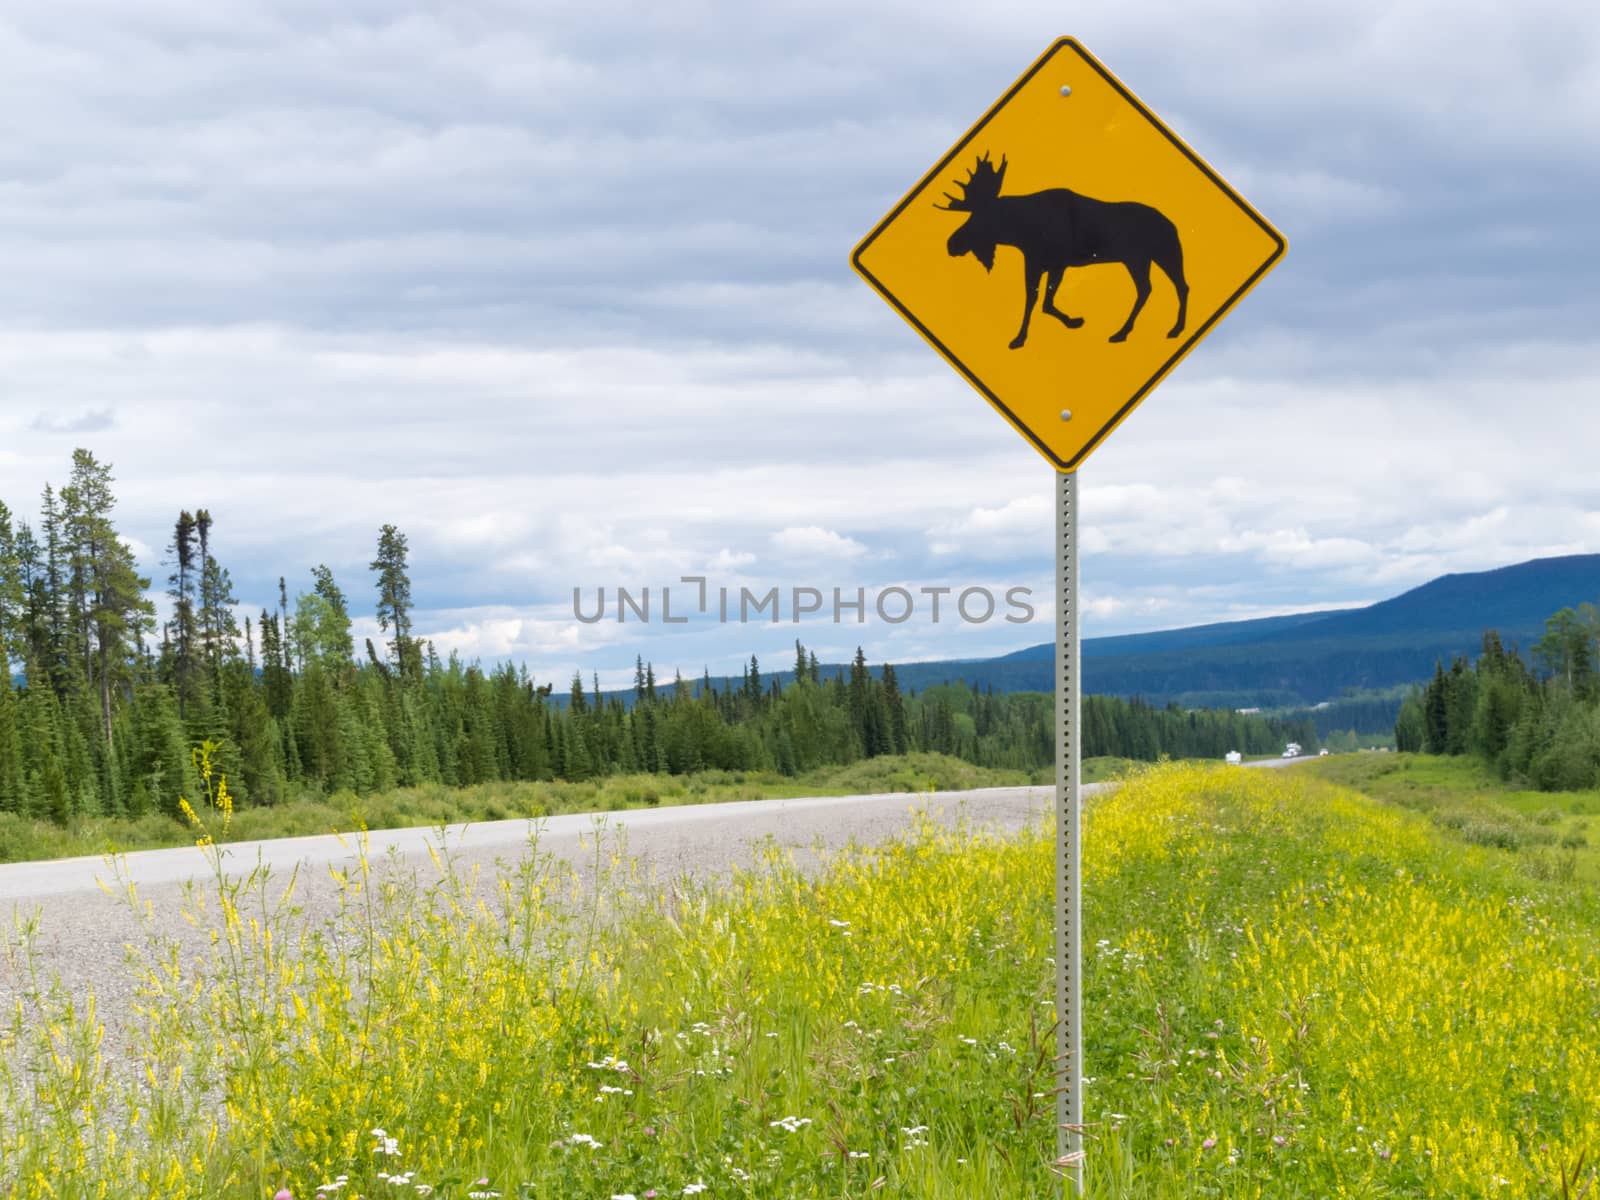 Yellow diamond traffic road sign warning, Attention moose crossing, posted alongside a scenic rural country road in lush countryside